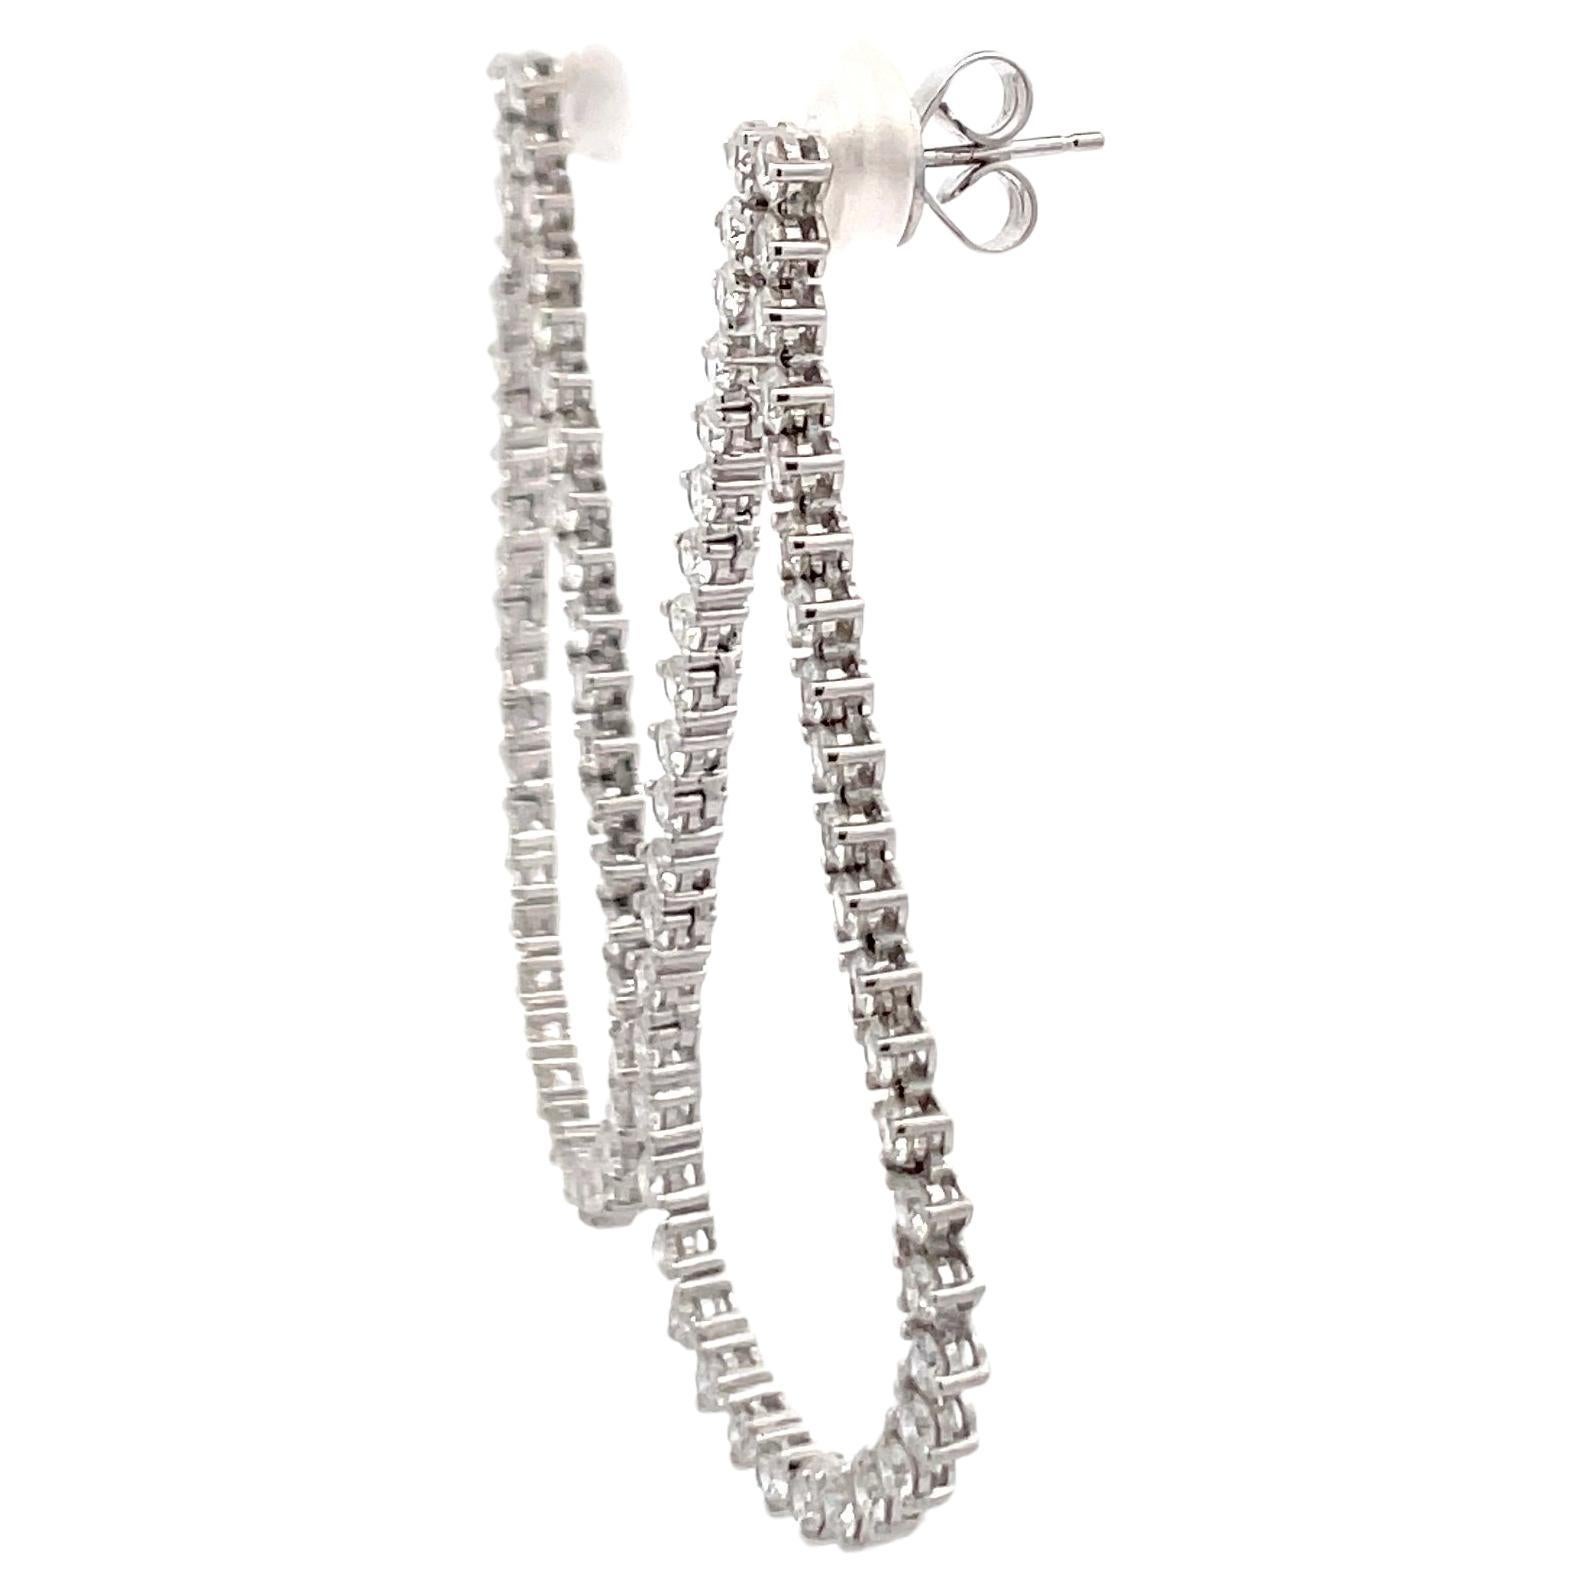 18 Karat white gold long drop earrings featuring 88 round brilliants weighing 4.19 carats.
Color G
Clarity SI